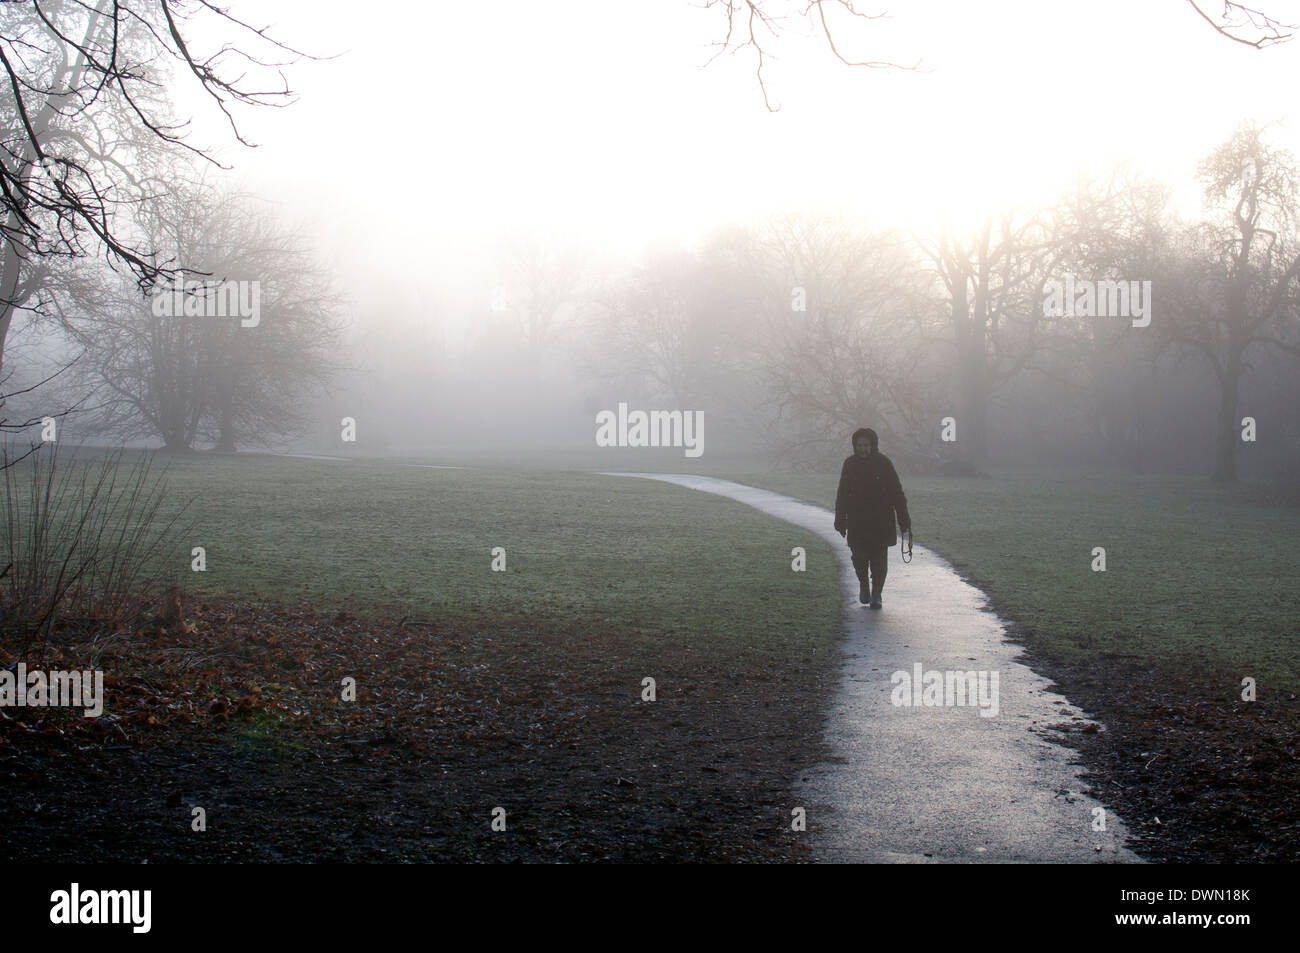 Elderly woman on footpath in foggy weather, Priory Park, Warwick, UK Stock Photo